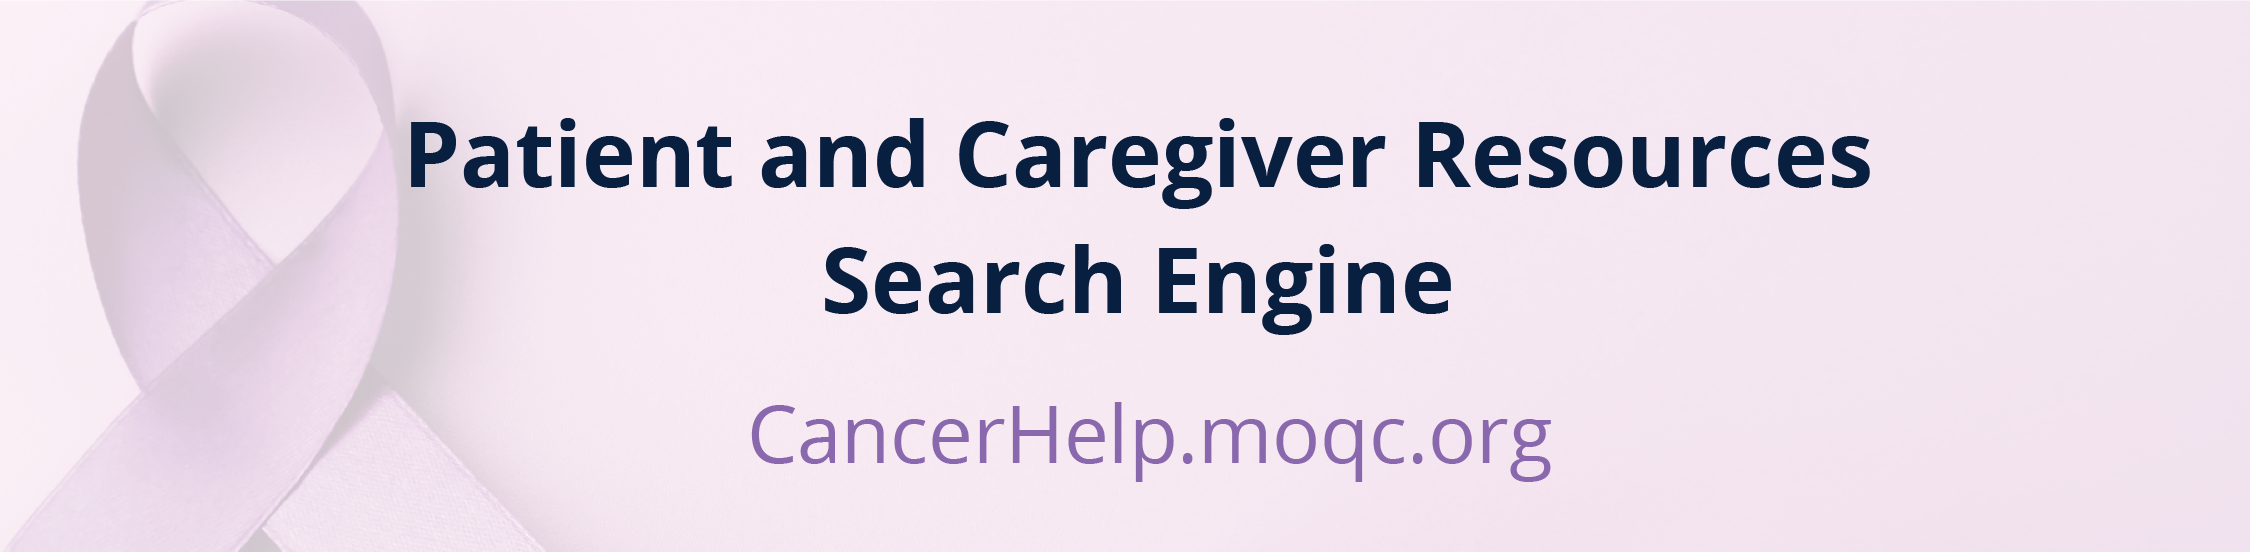 Patient and Caregiver Resources Search Engine